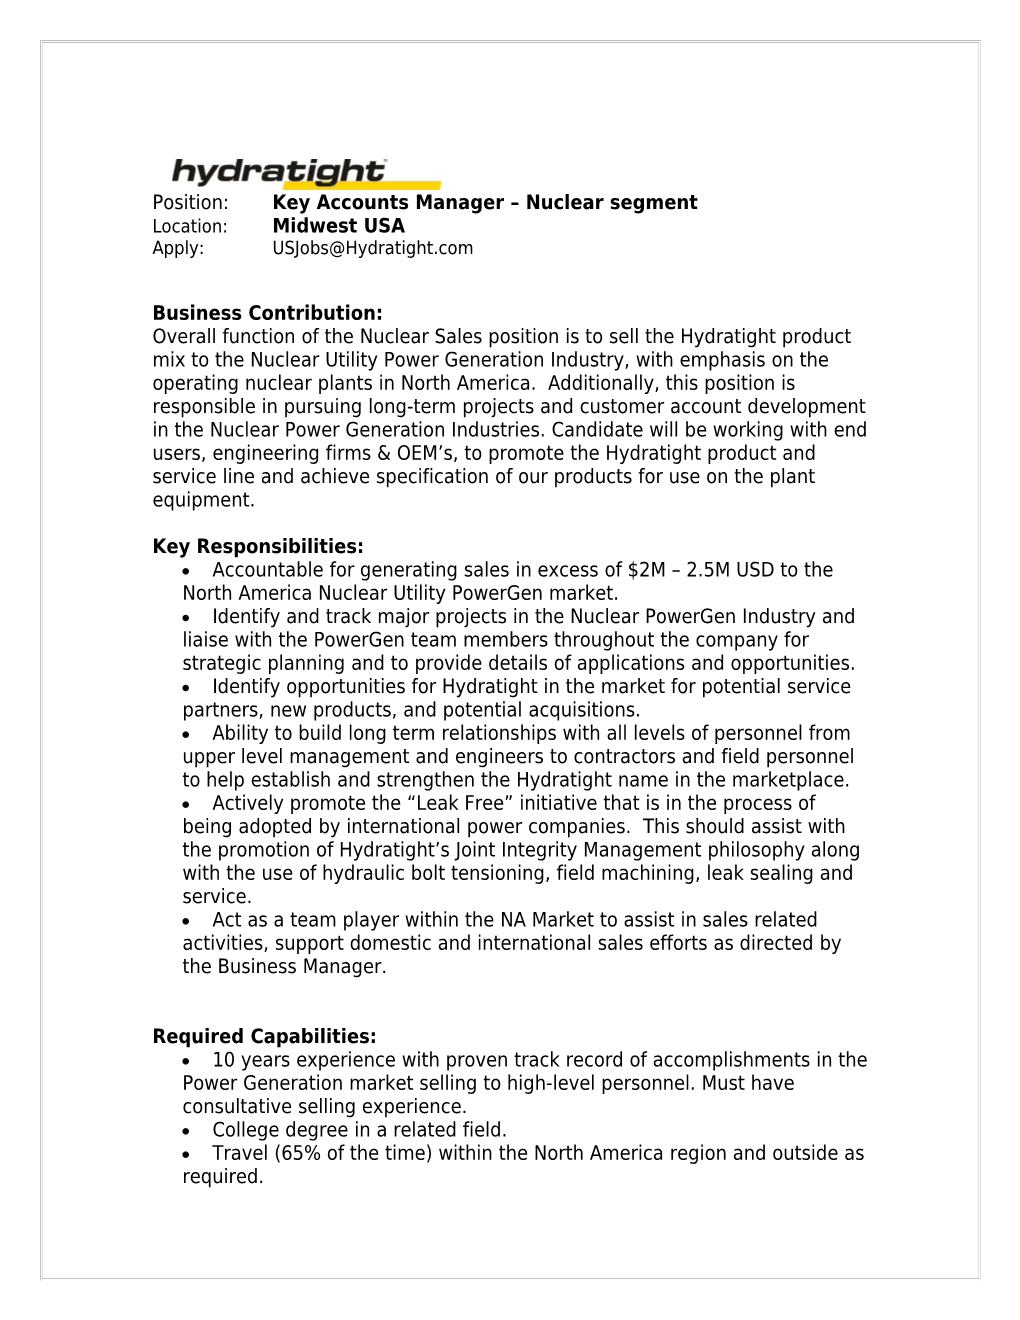 Position: Key Accounts Manager Nuclear Segment